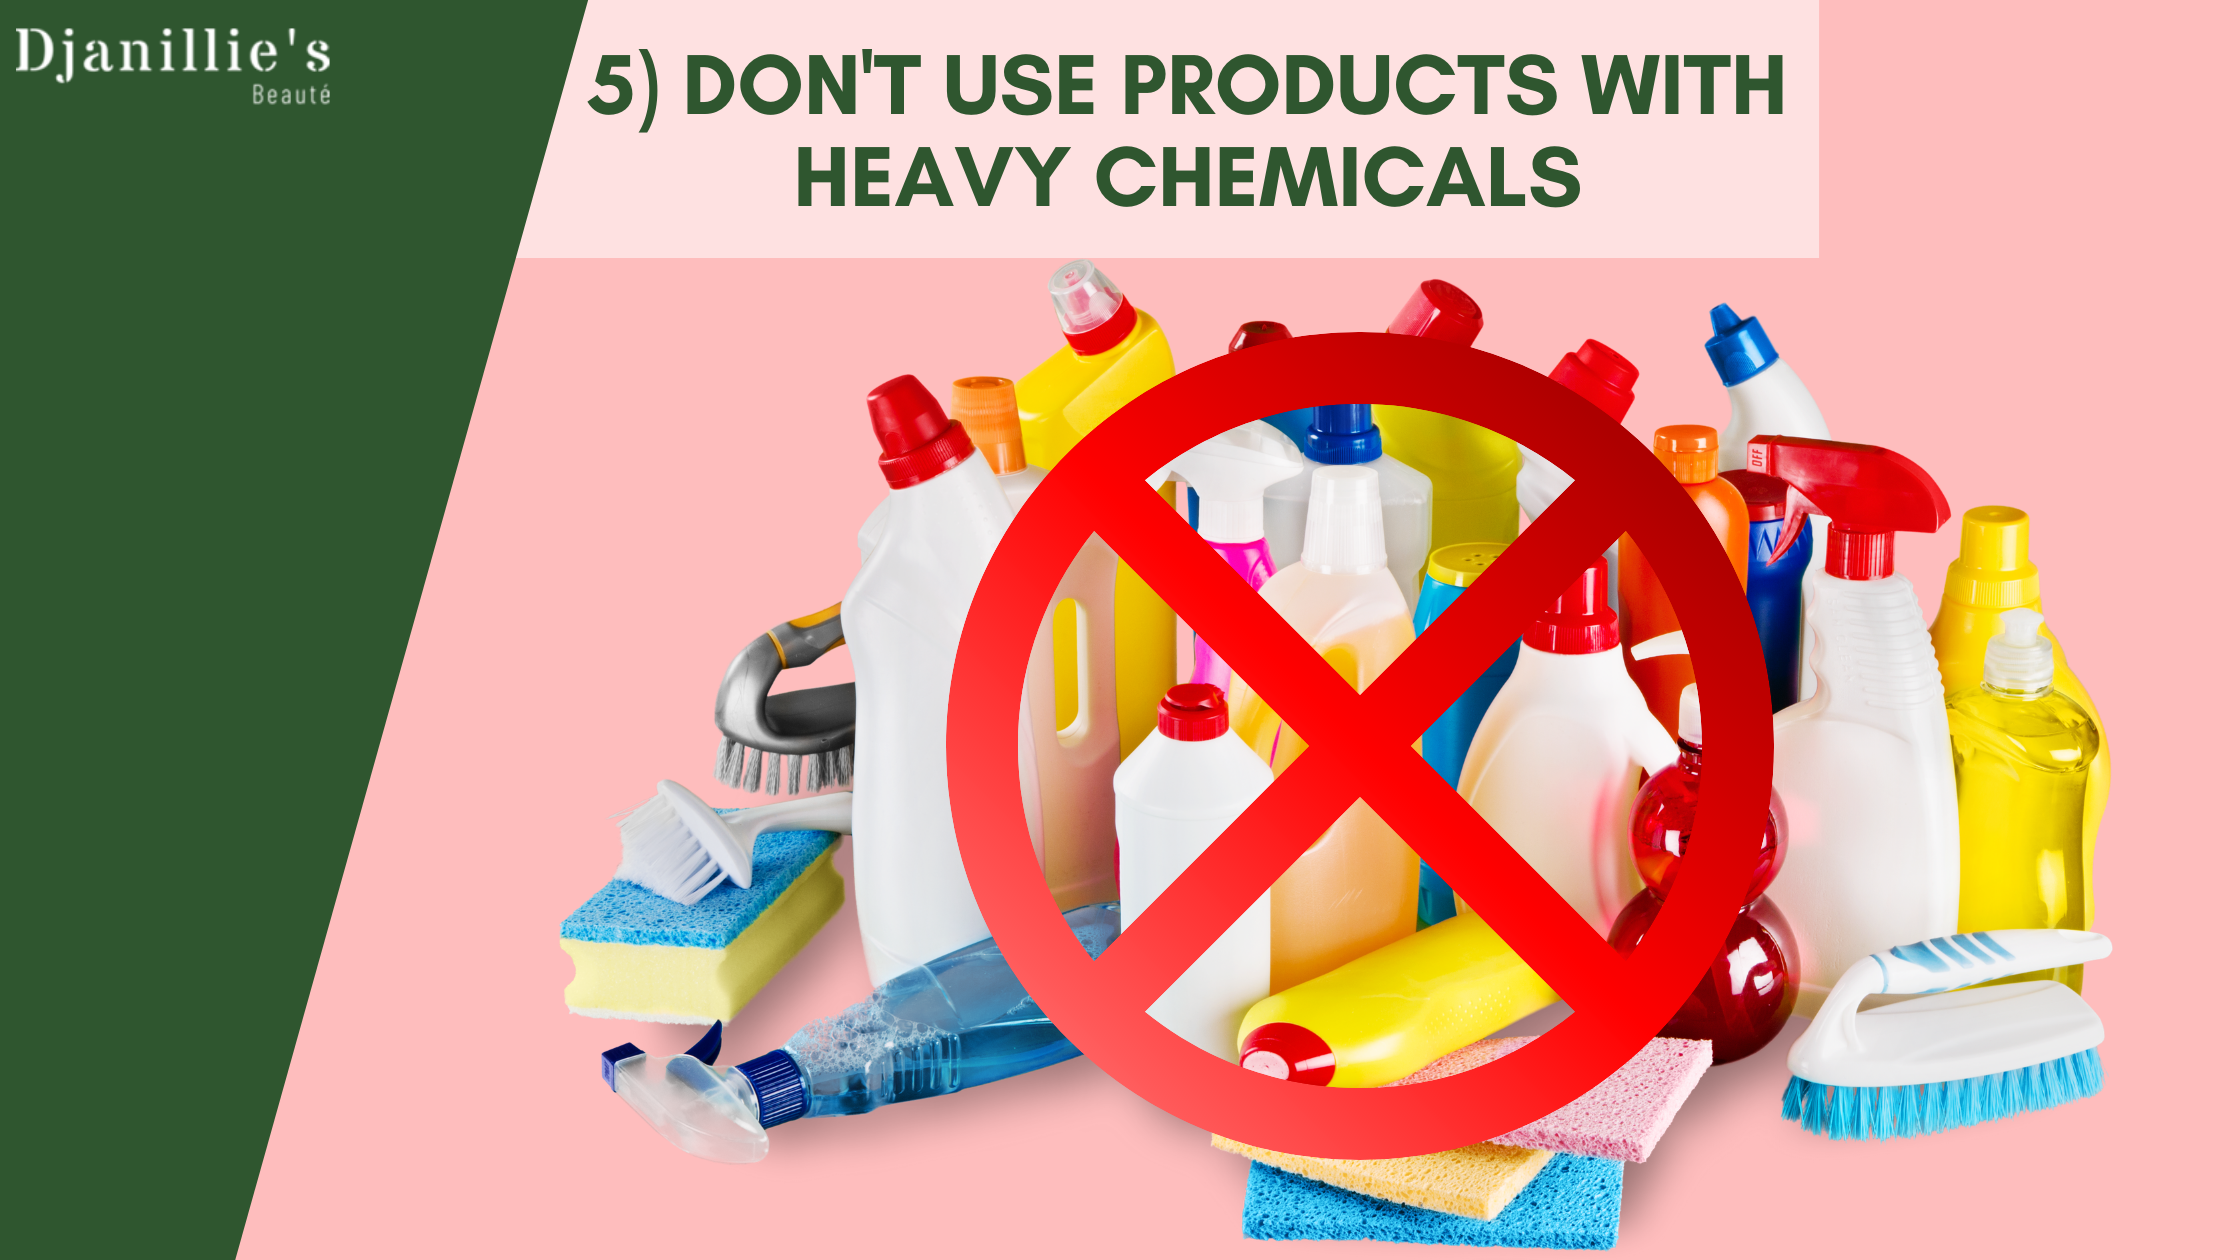 5) Don't Use Products With Heavy Chemicals